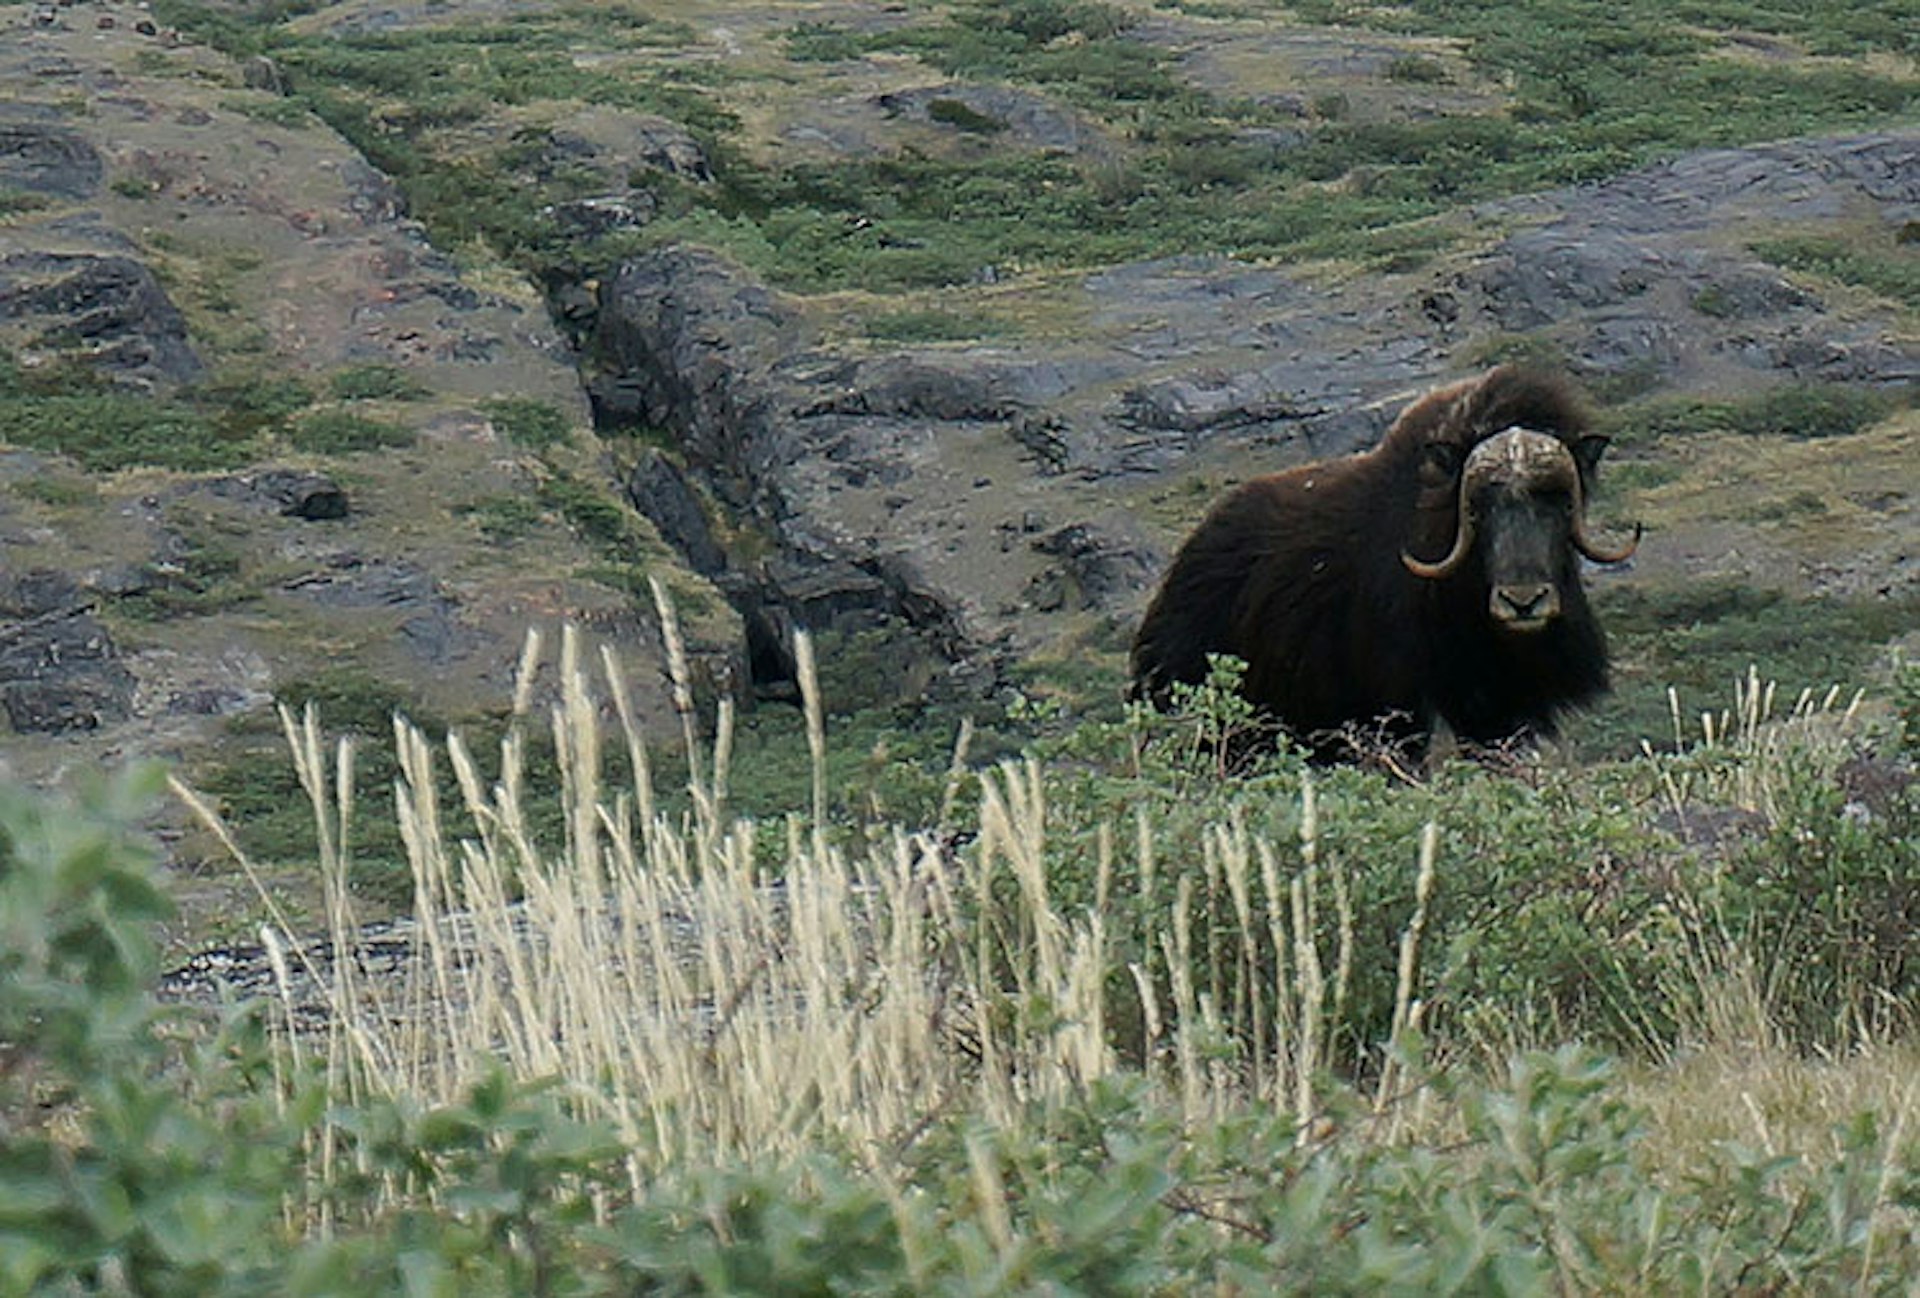 We've been spotted: looking a muskox in the eyes, from behind a boulder. Image by Anita Isalska / Lonely Planet